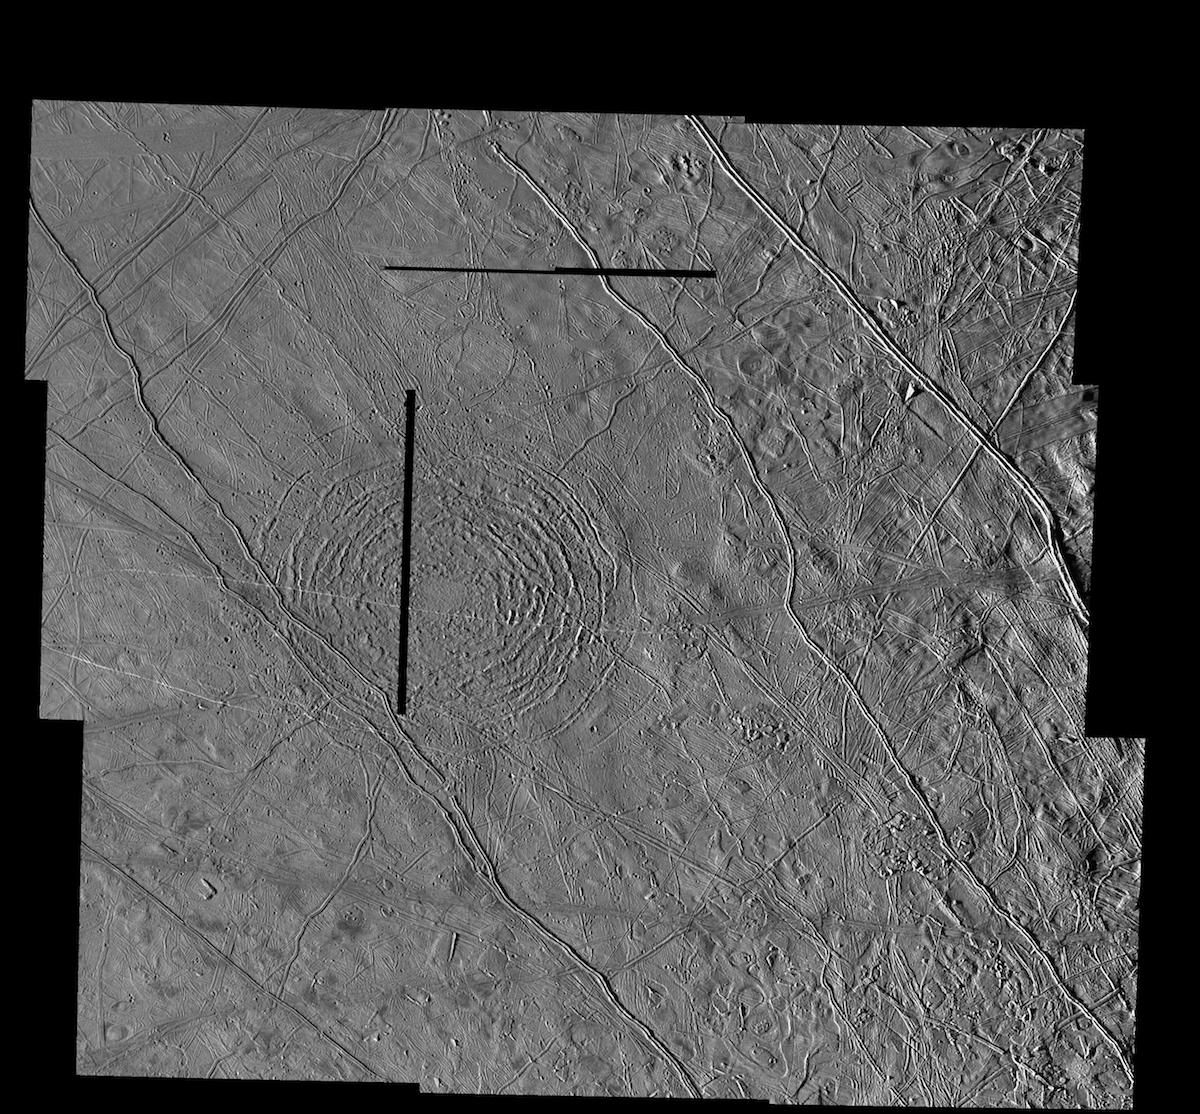 black and white view of circular ridges on an icy surface